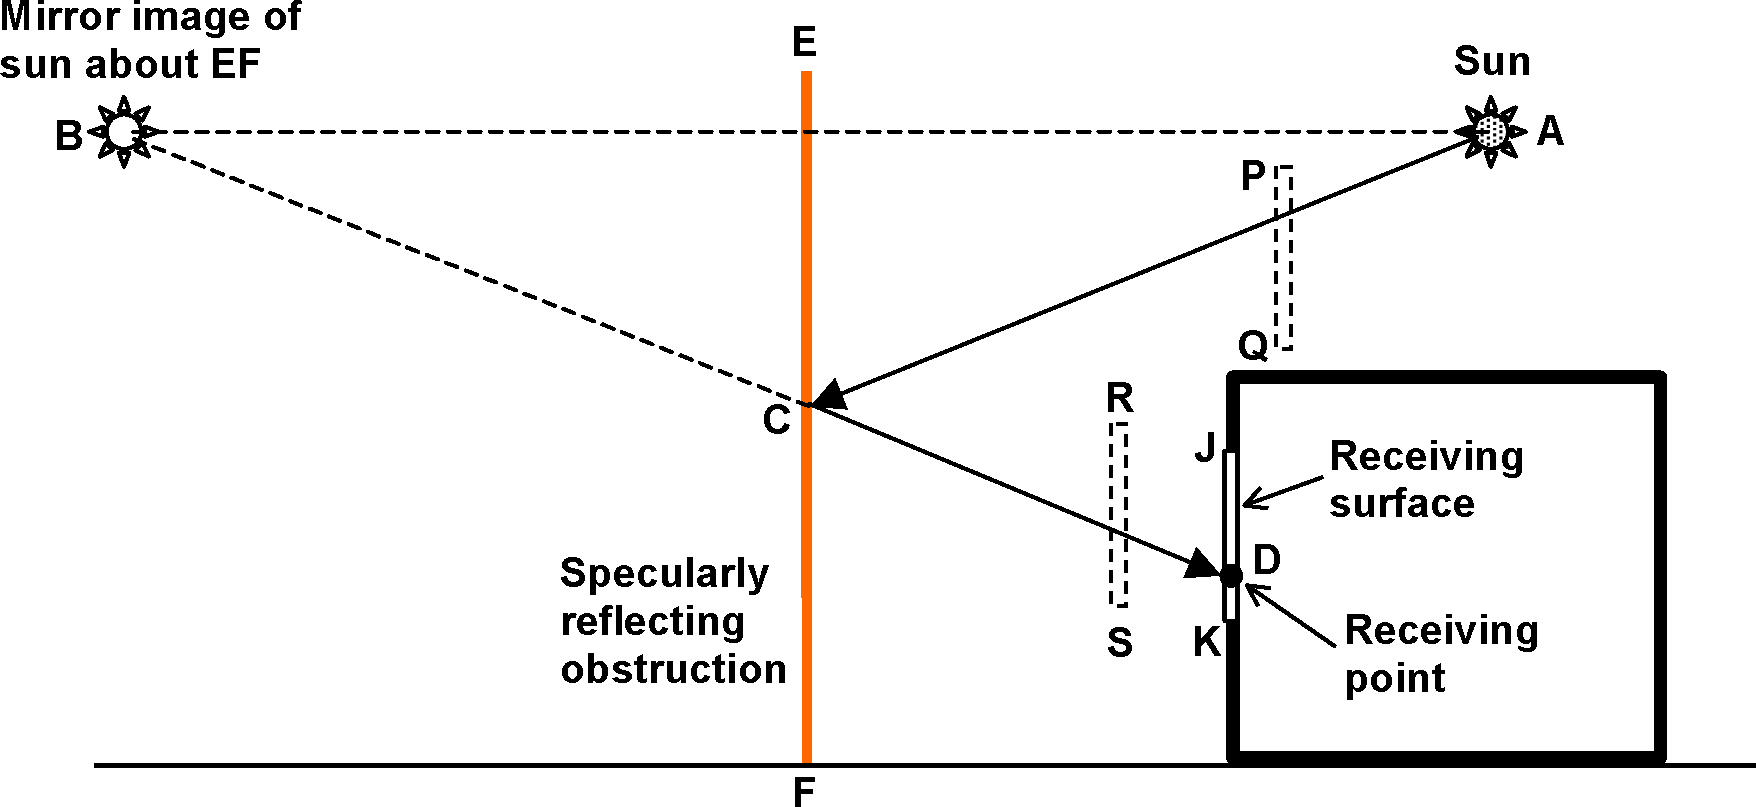 Two-dimensional schematic showing specular reflection from an obstruction such as the glazed façade of a neighboring building. The receiving point receives specularly reflected beam solar radiation if (1) DB passes through specularly reflecting surface EF, (2) CD does not hit any obstructions (such as RS), and (3) AC does not hit any obstructions (such as PQ). [fig:two-dimensional-schematic-showing-specular]